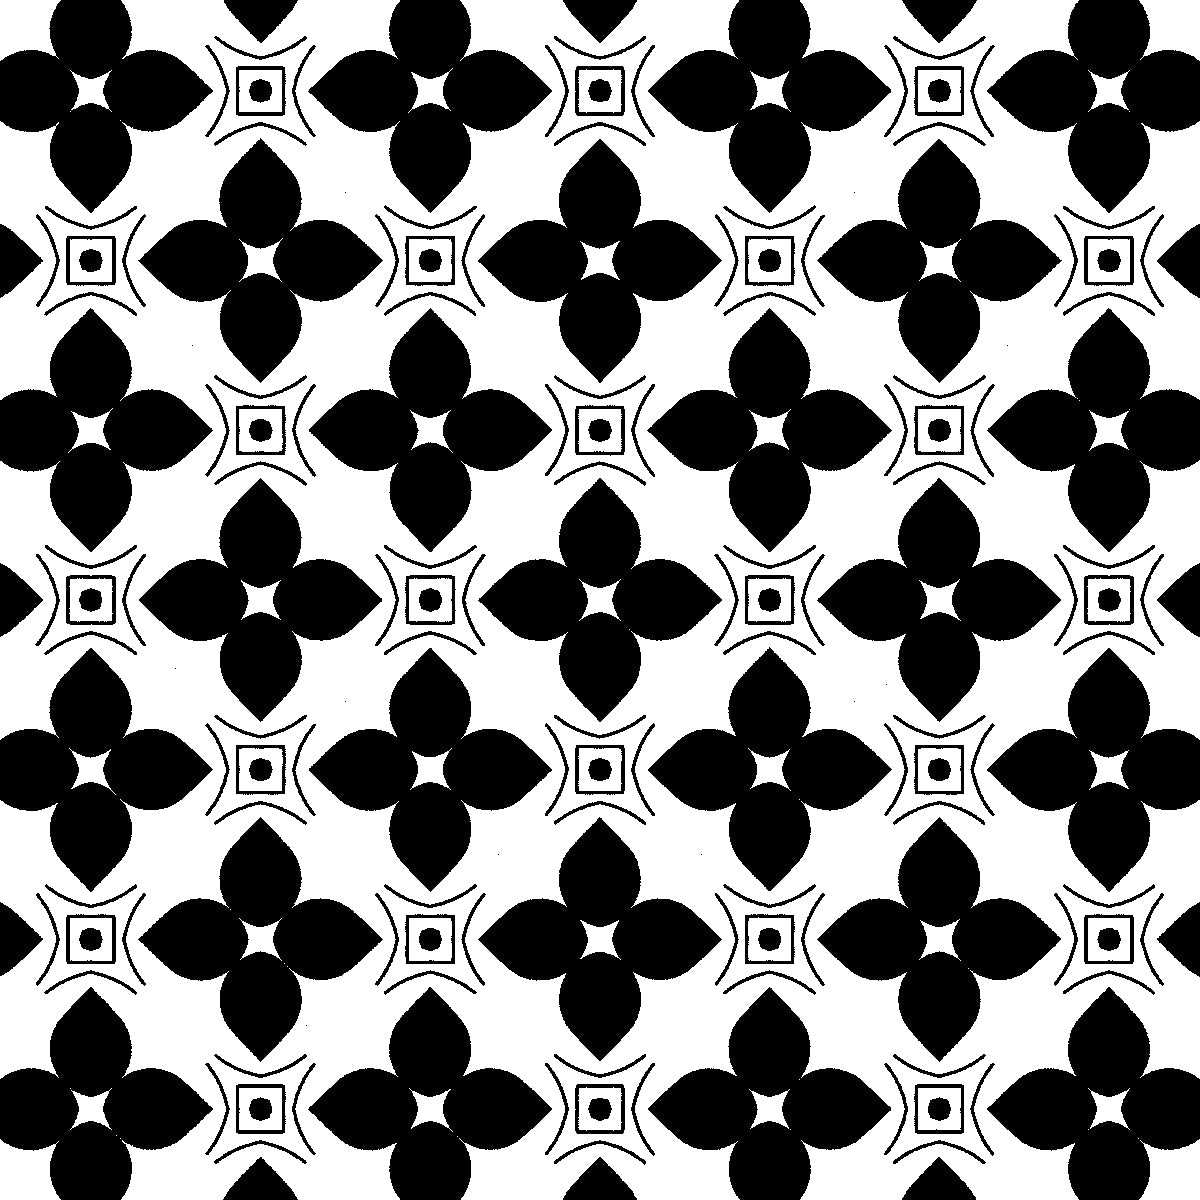 Black and White Abstract Seamless Pattern 42.0 - Printable Scrapbook Paper